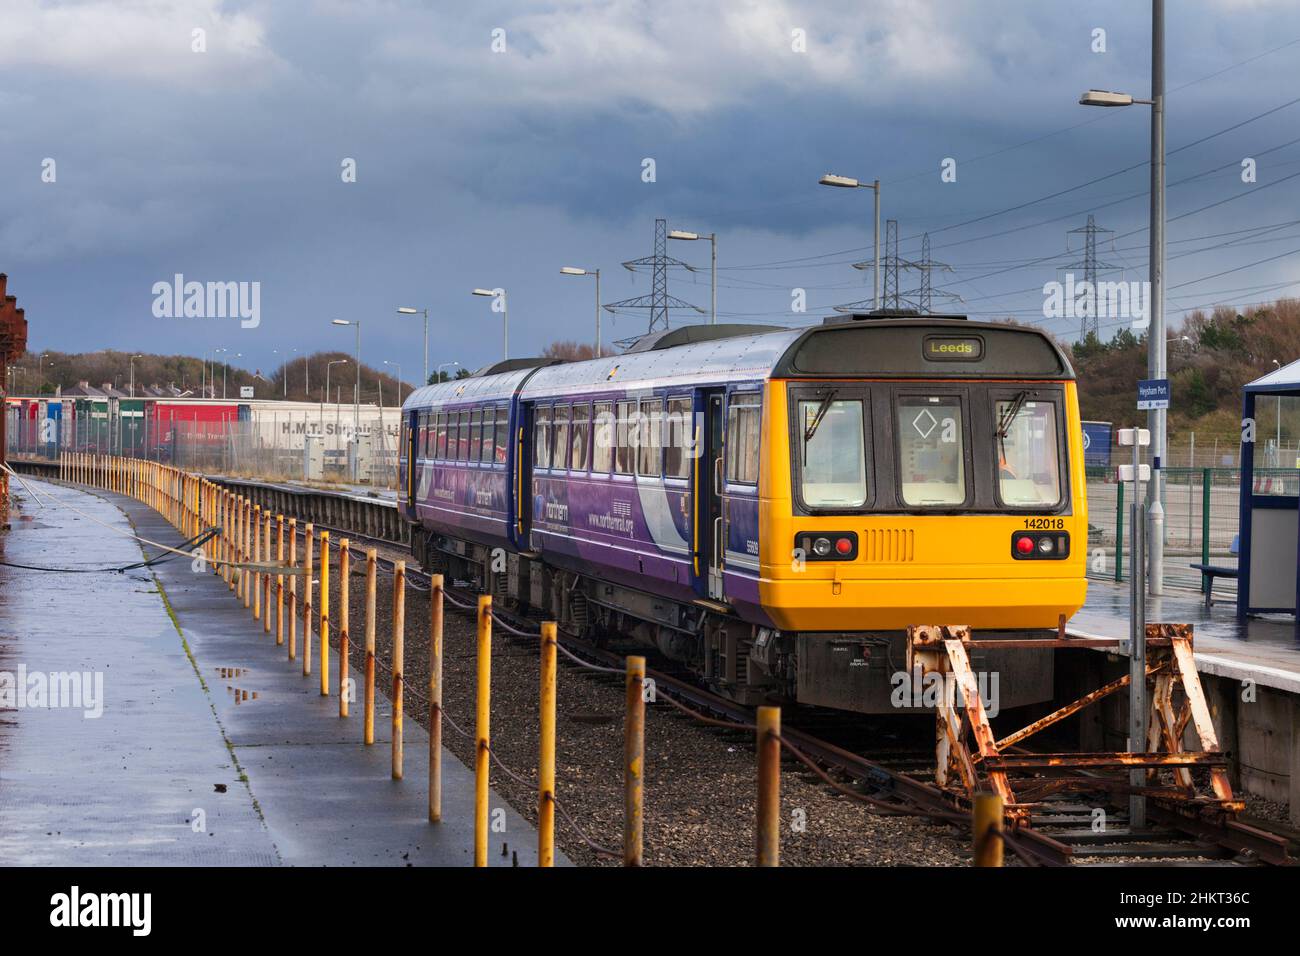 Northern Rail class 142 pacer train  at the semi derelict Heysham Port railway station with the daily boat train to connect with the Isle of Man Stock Photo